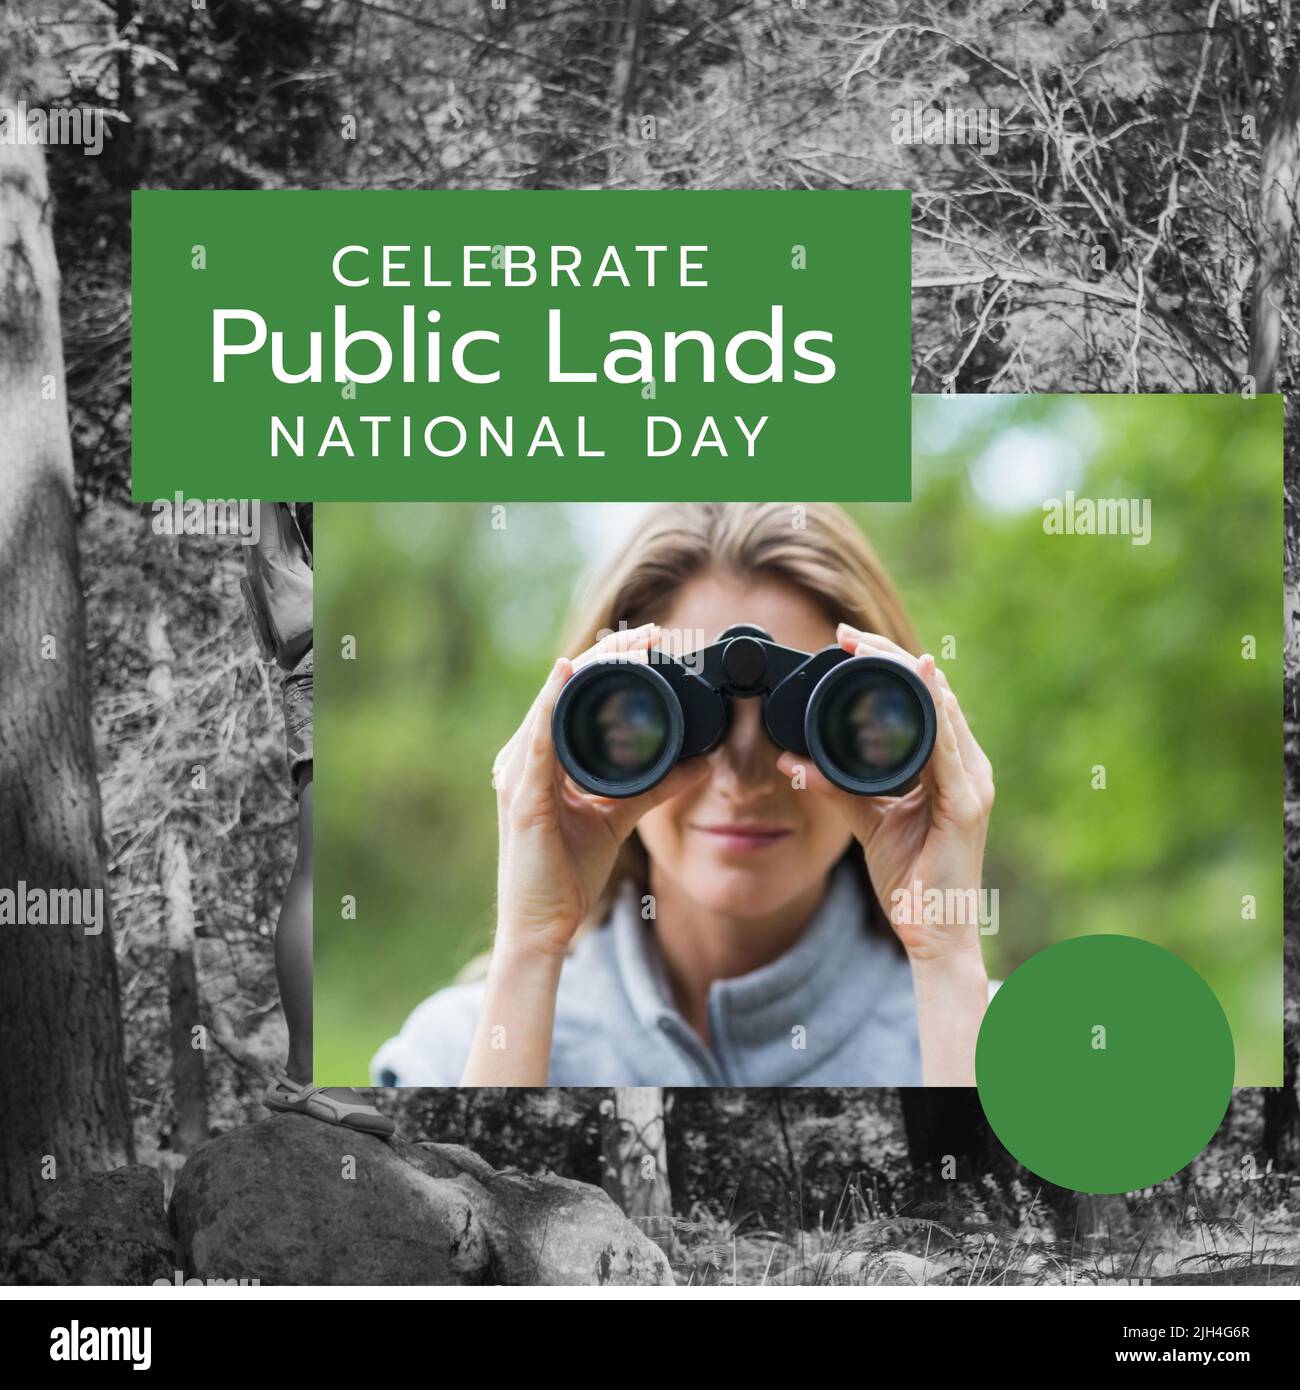 Composition of celebrate national public lands day text with caucasian woman hiking and landscape Stock Photo